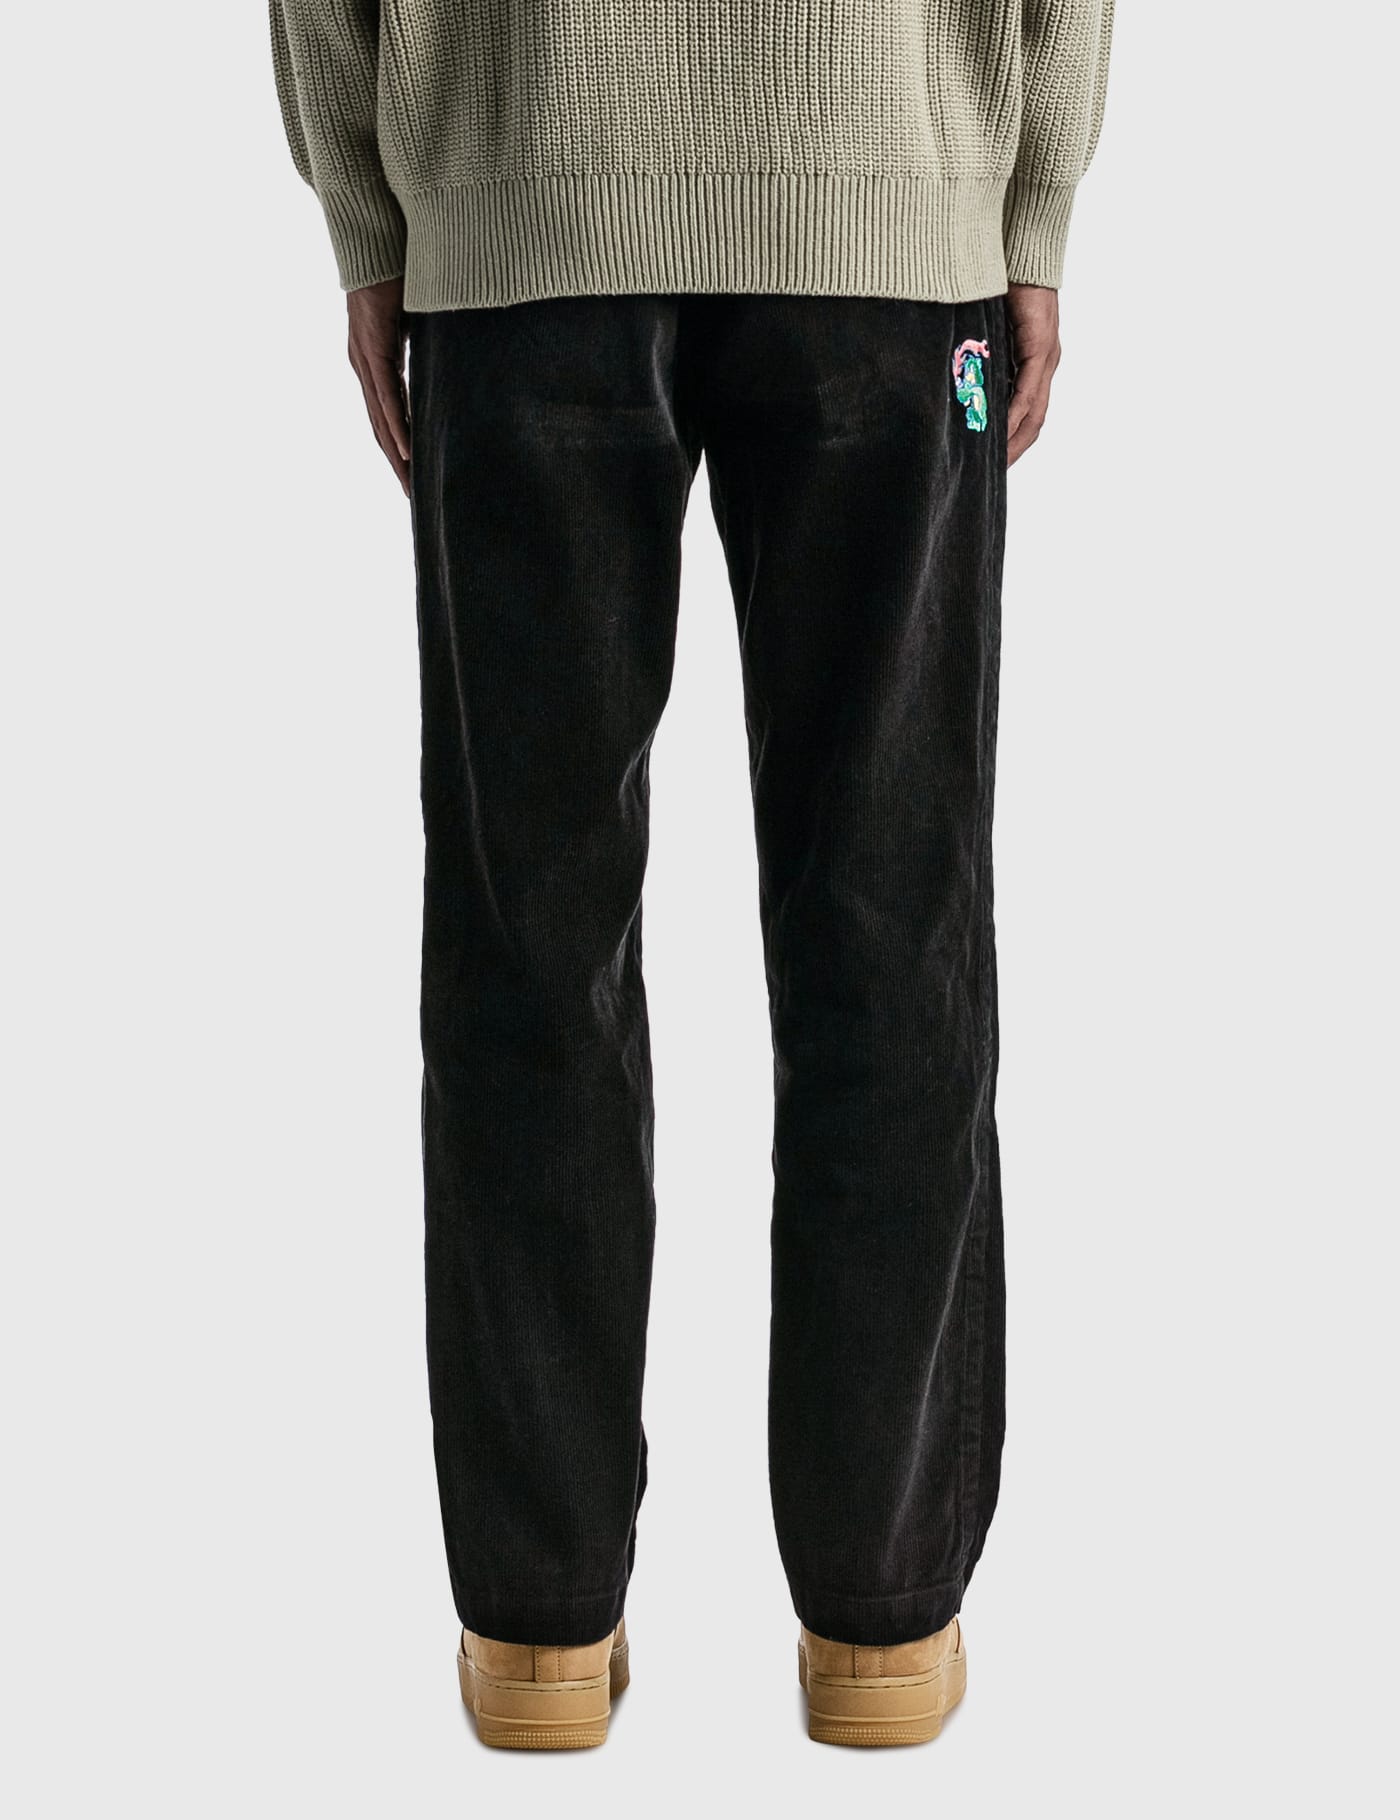 LMC - Flame Bear Corduroy Pants | HBX - Globally Curated Fashion and  Lifestyle by Hypebeast